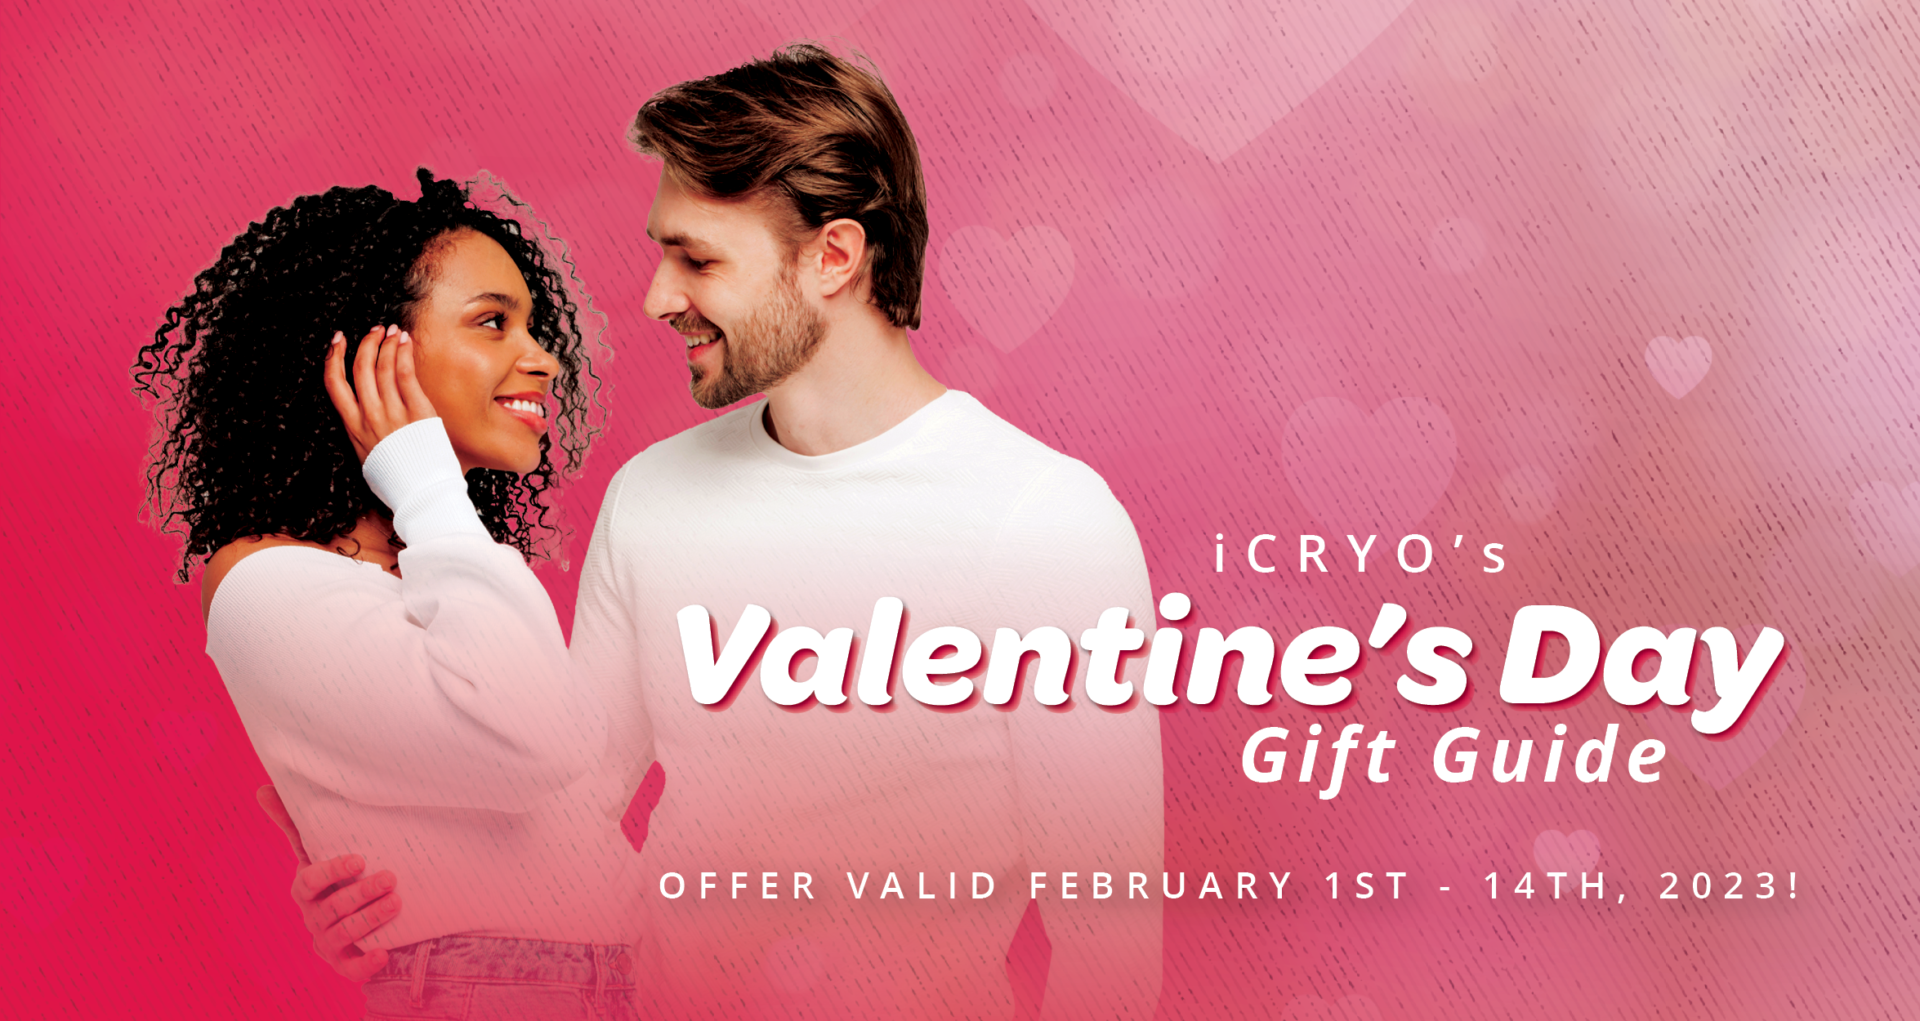 Valentines Day Gift Guide at iCRYO